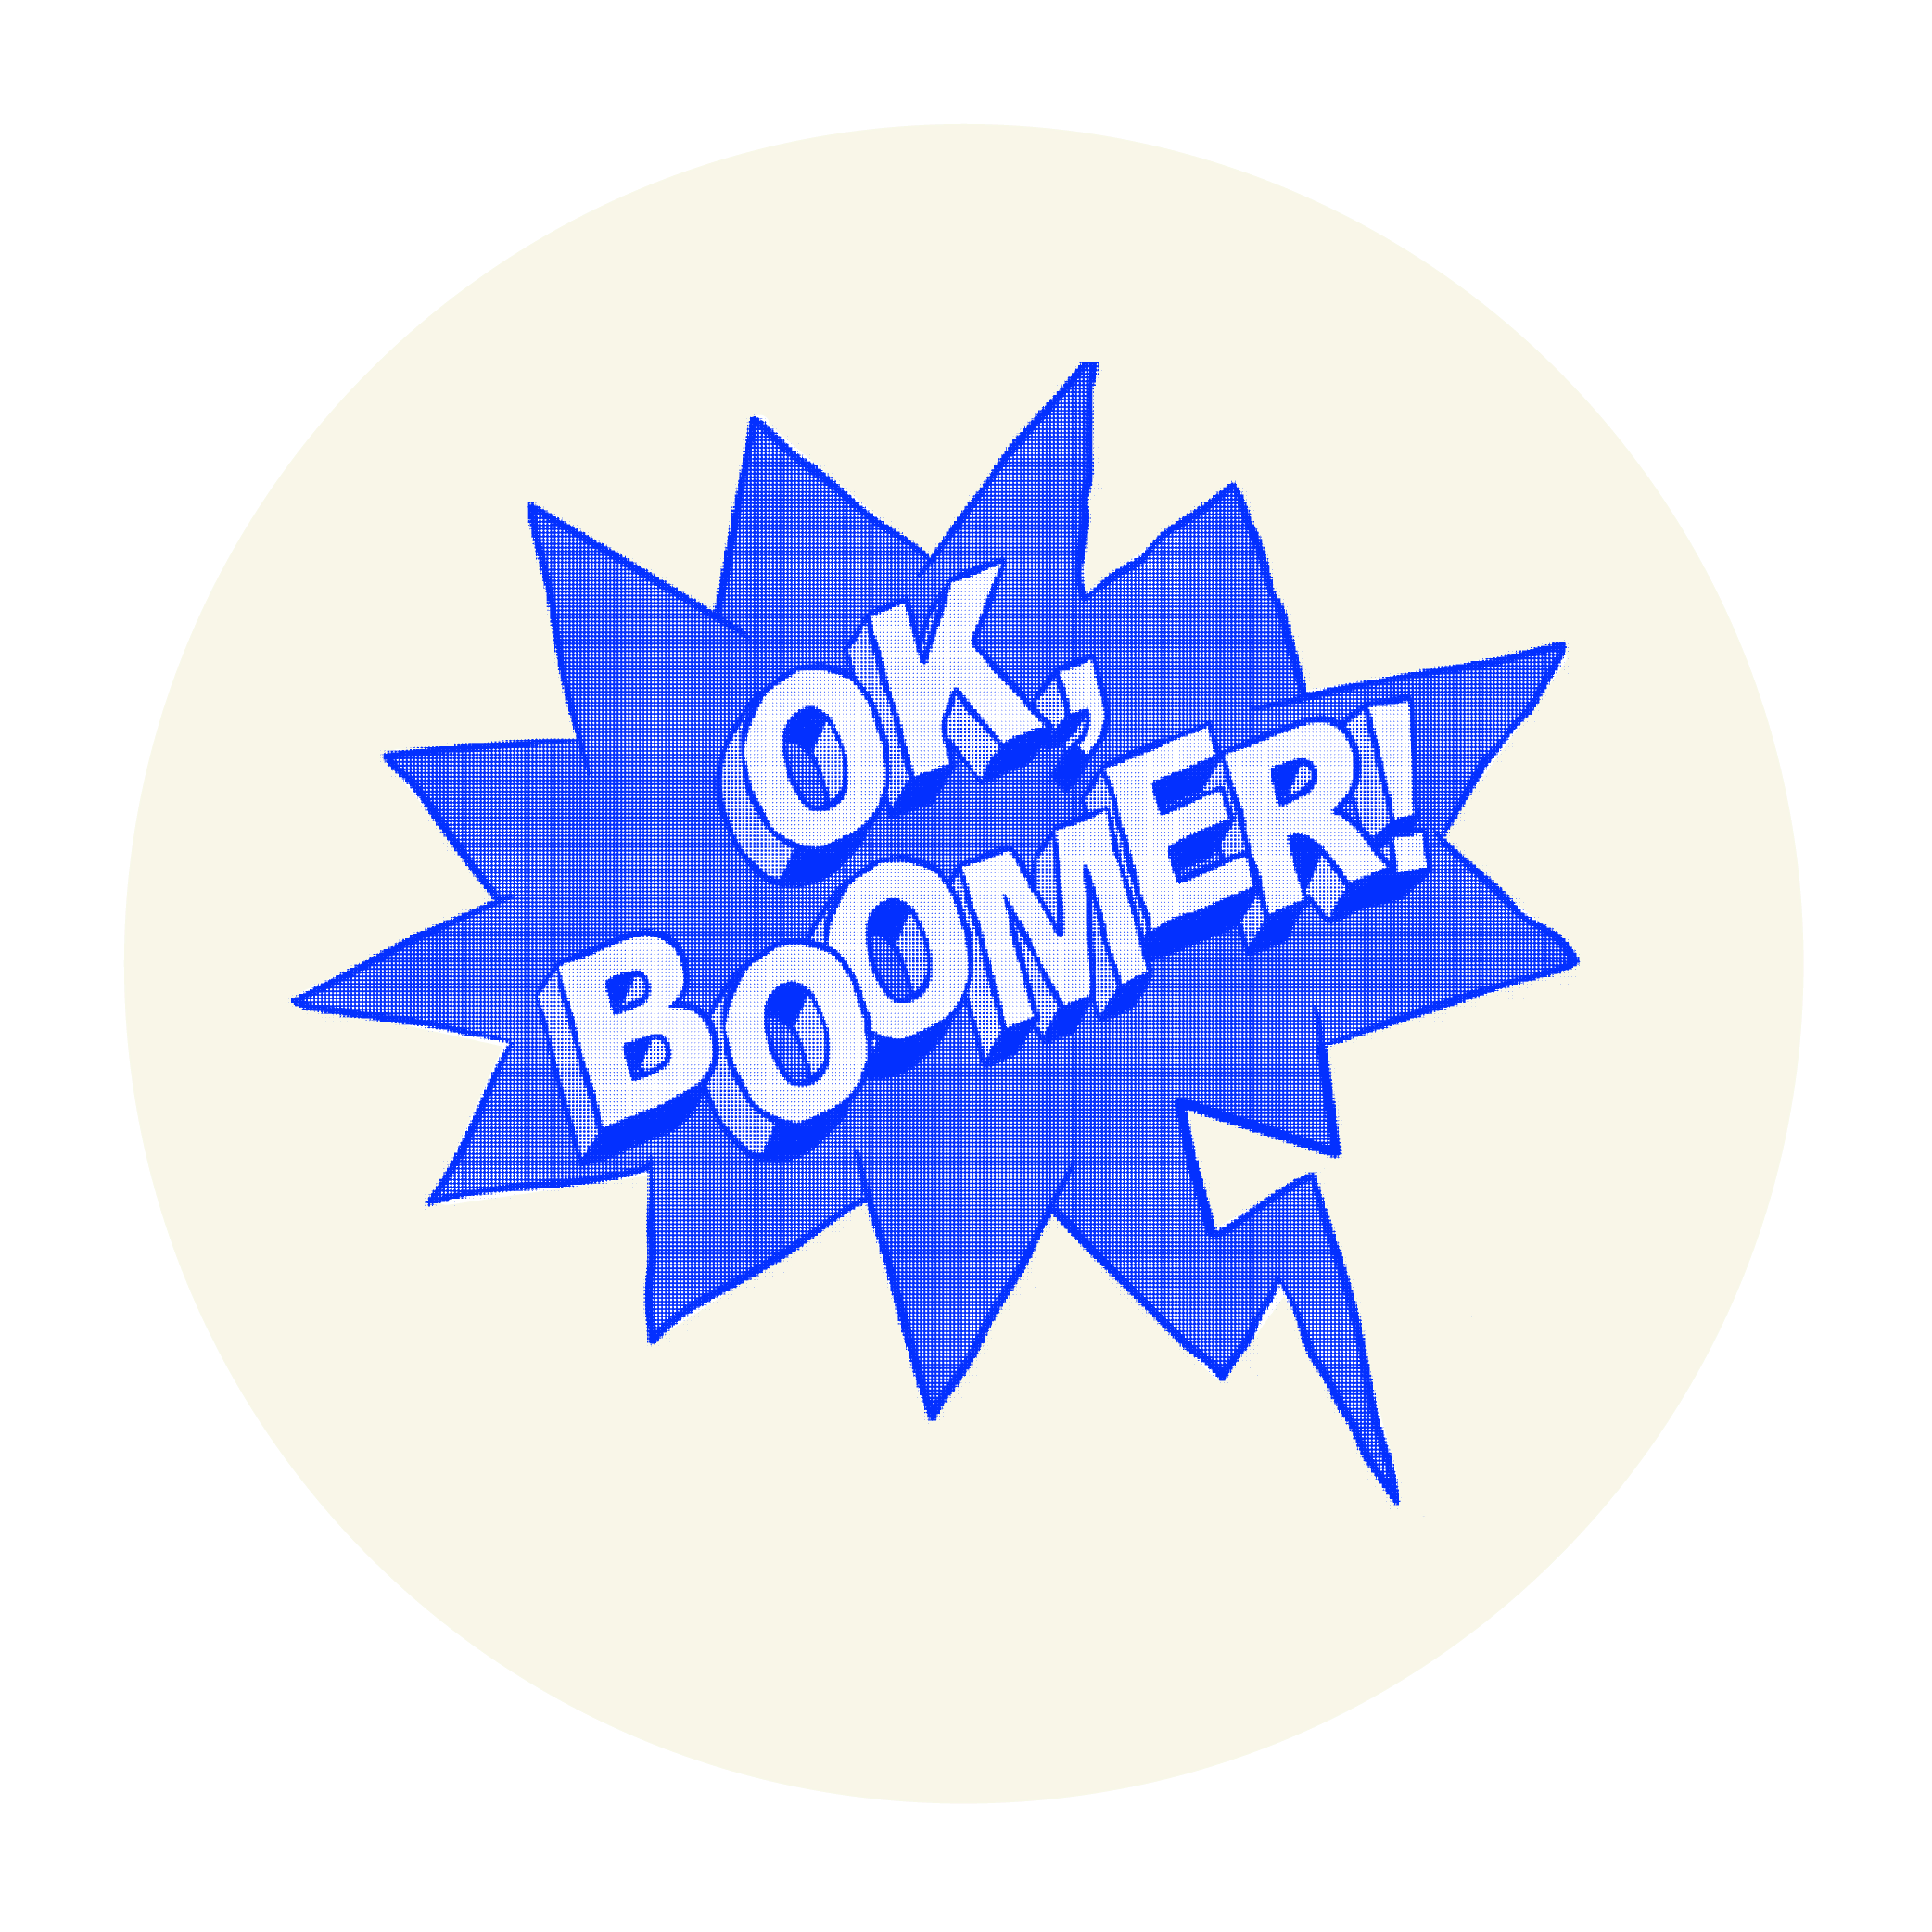 Comical text saying 'Okay, Boomer!'. A common phrase used by youth towards the older generation to highlight the older generation's lack of knowledge on today's society and technology.